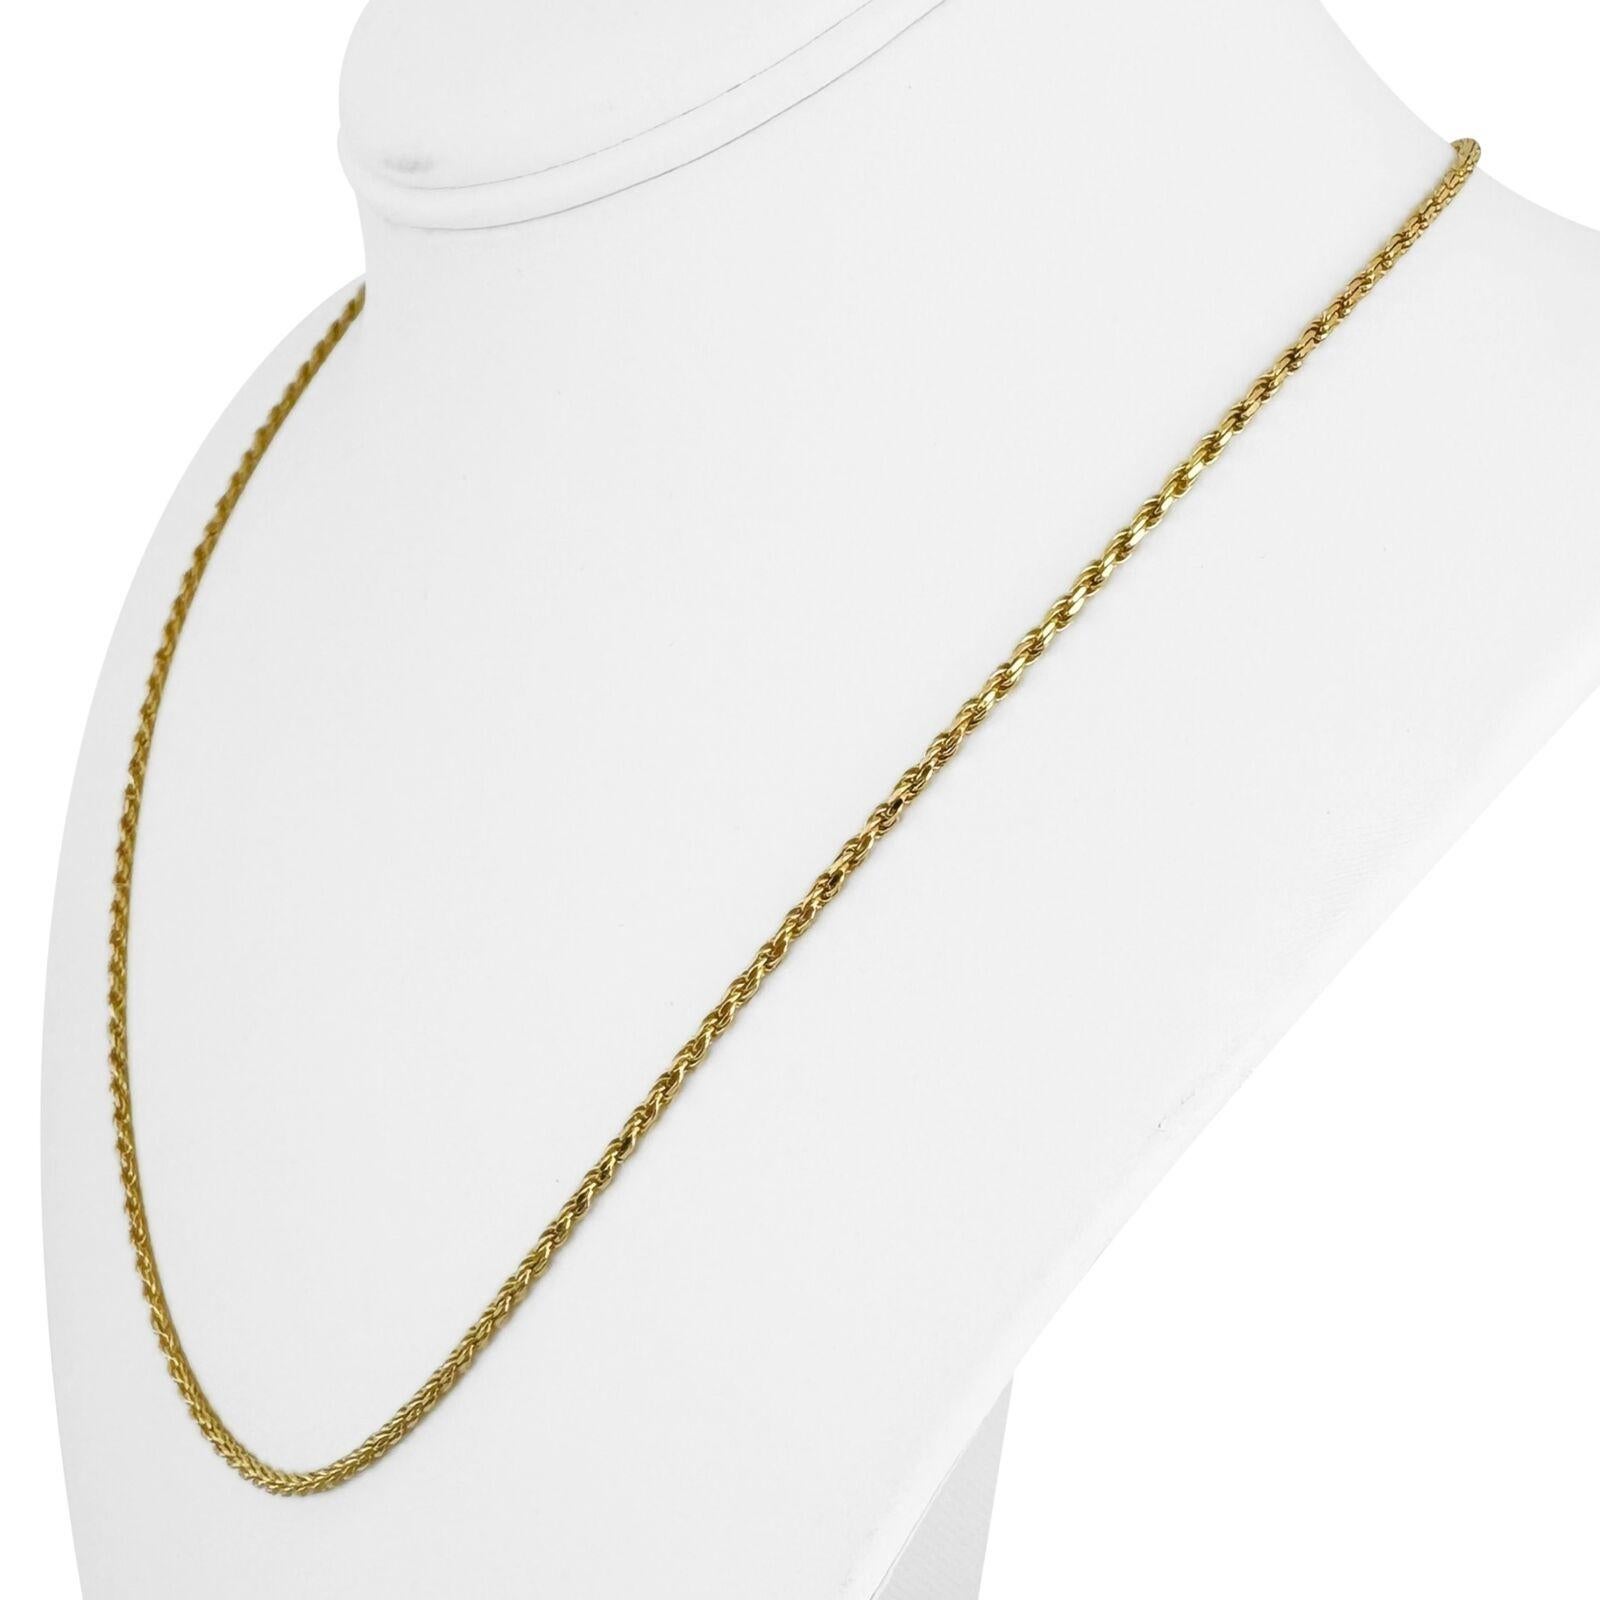 18k Yellow Gold 8.7g Solid Thin 2mm Diamond Cut Rope Chain Necklace Italy 20